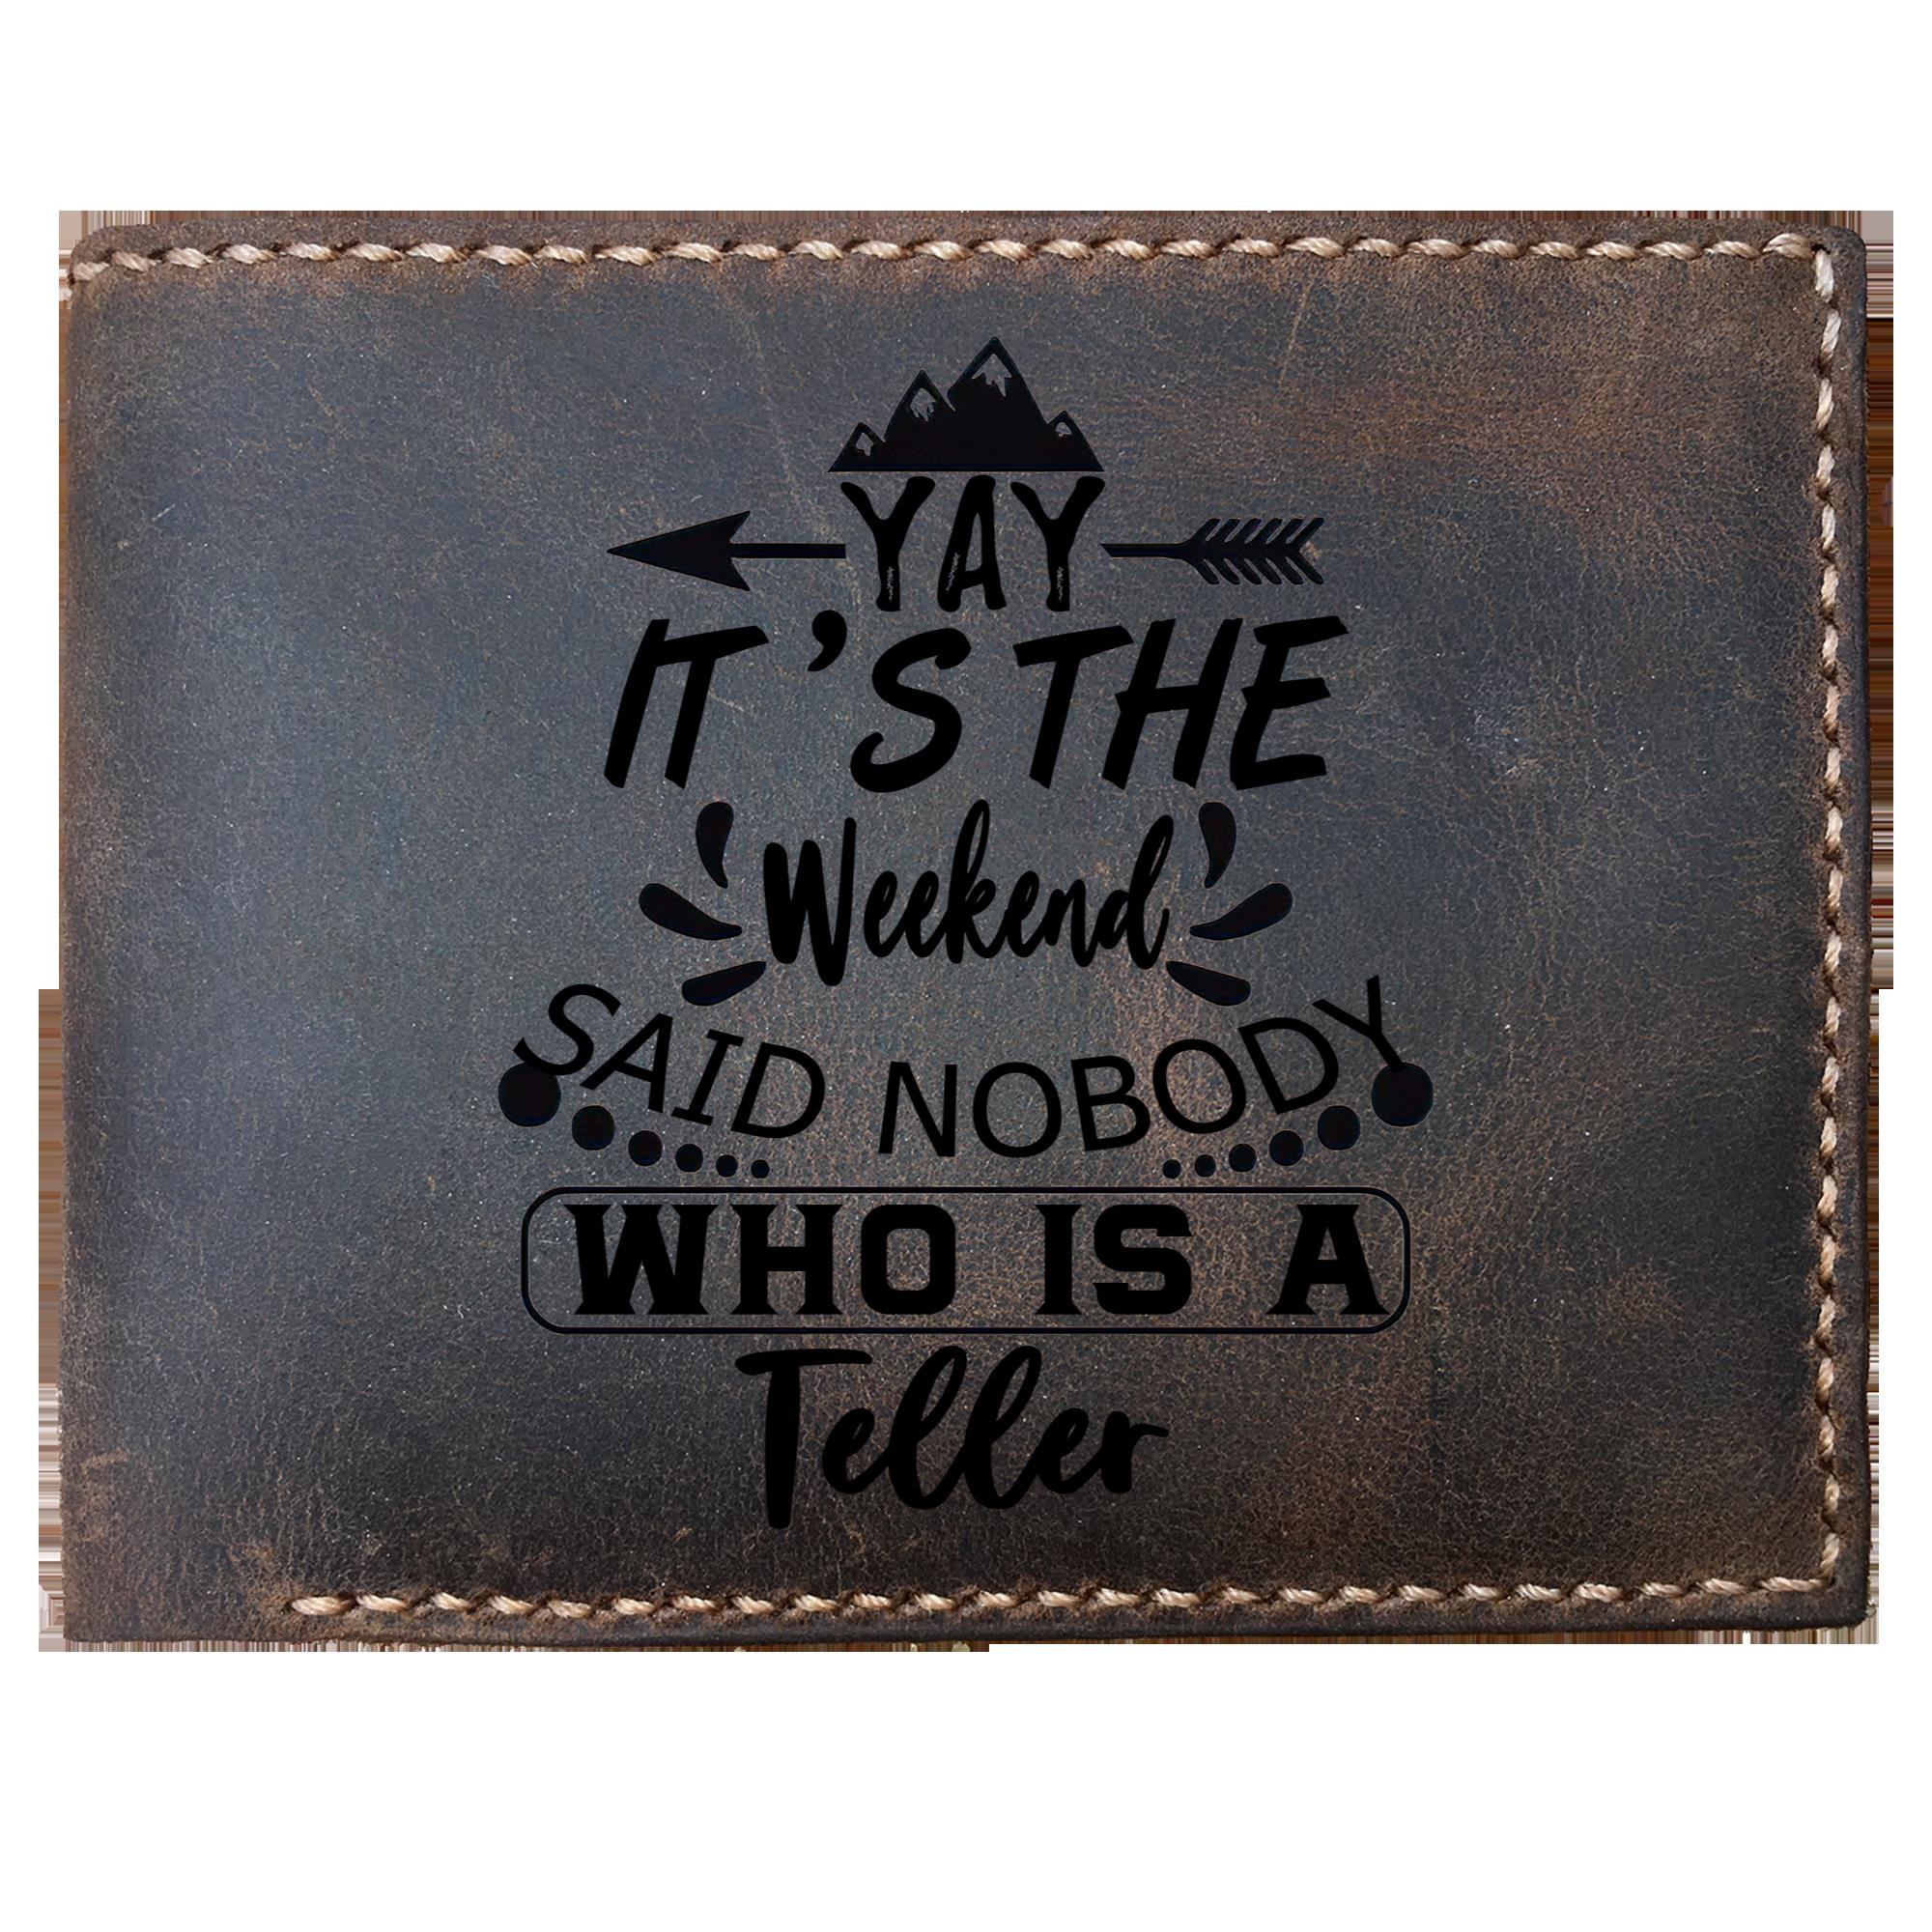 Skitongifts Funny Custom Laser Engraved Bifold Leather Wallet For Men, It's The Weekend Said Nobody Who Is A Teller, Father's Day Gifts